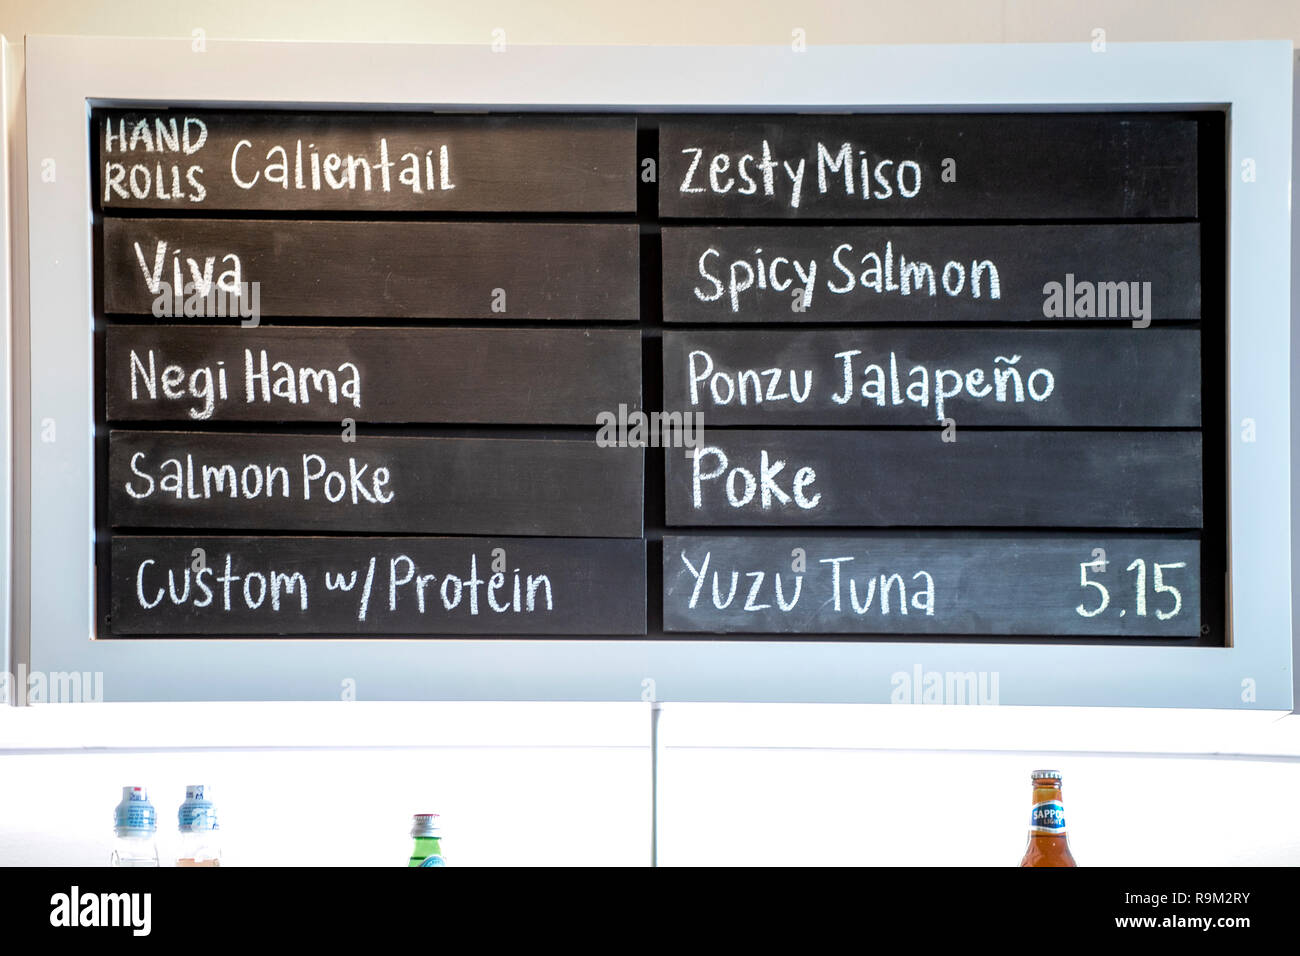 The wall display menu of a Costa Mesa, CA, Japanese fast food restaurant lists a choice of fish ingredients for hand rolls and poke dishes. Stock Photo